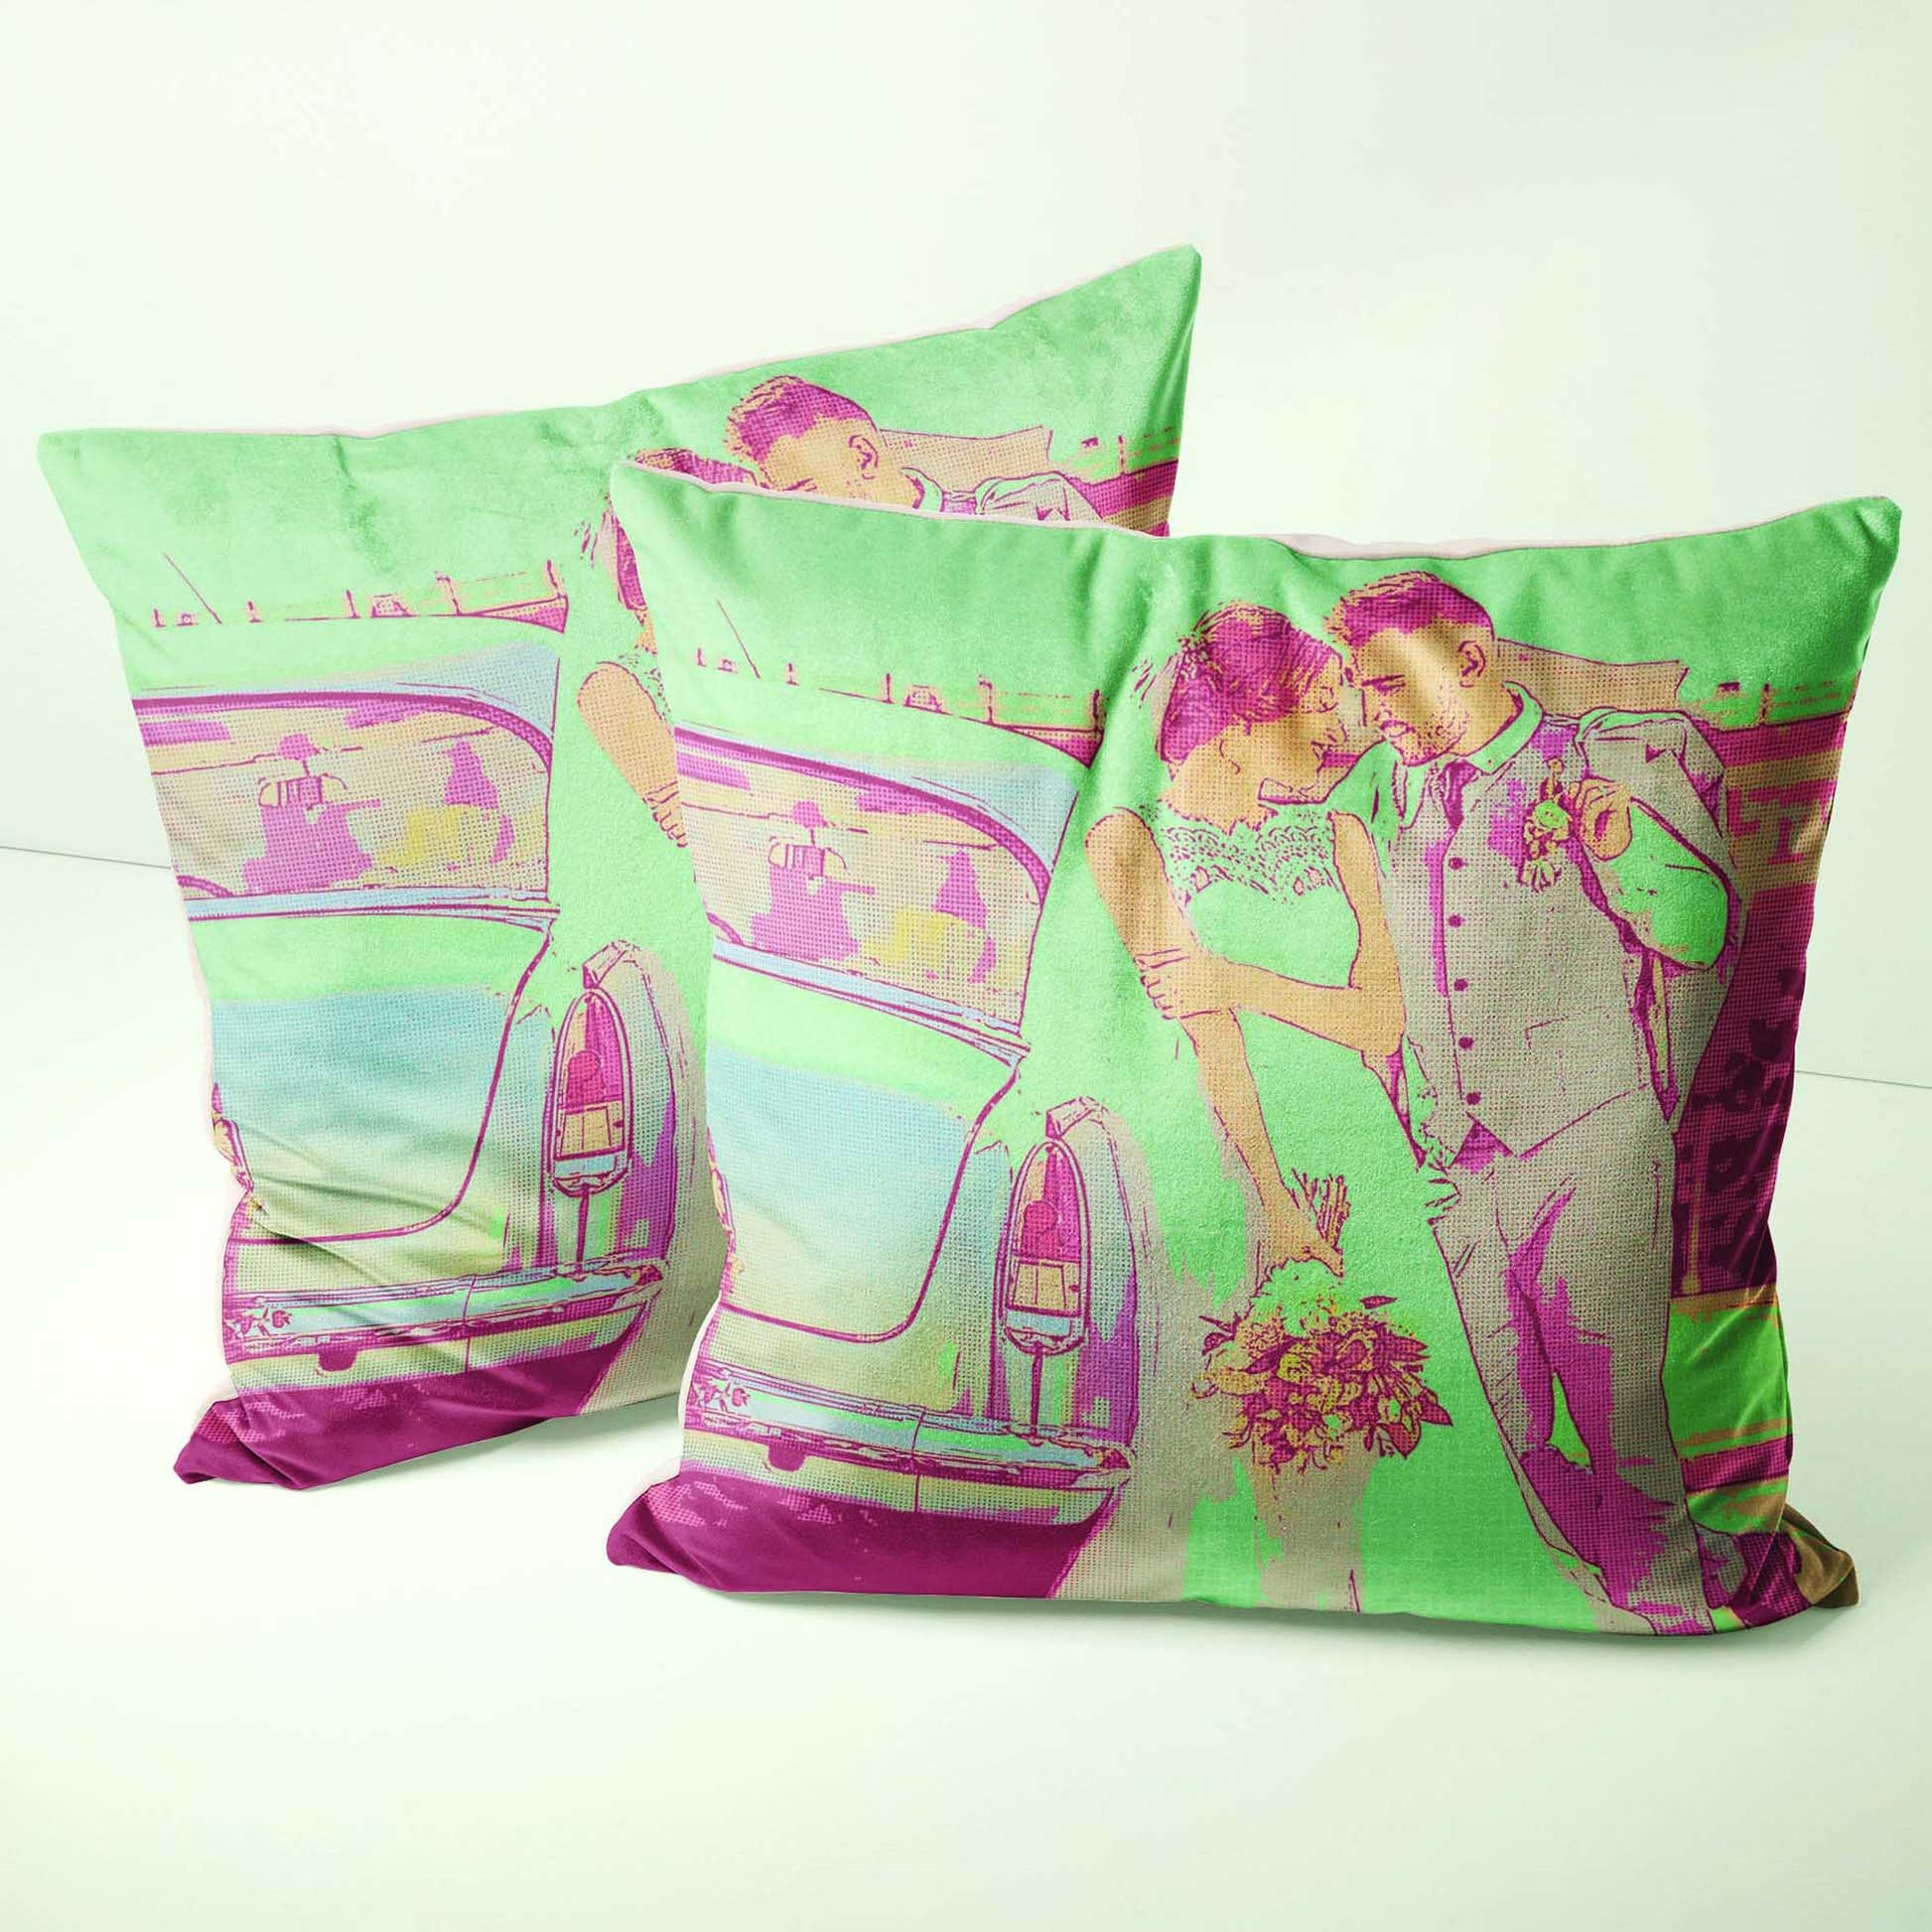 Personalise your home decor with a Pink & Green Pop Art Cushion. Made from soft velvet fabric, this cosy and comfortable cushion brings a full and colourful vibe to any room. Print it from a photo to create a unique and original design 